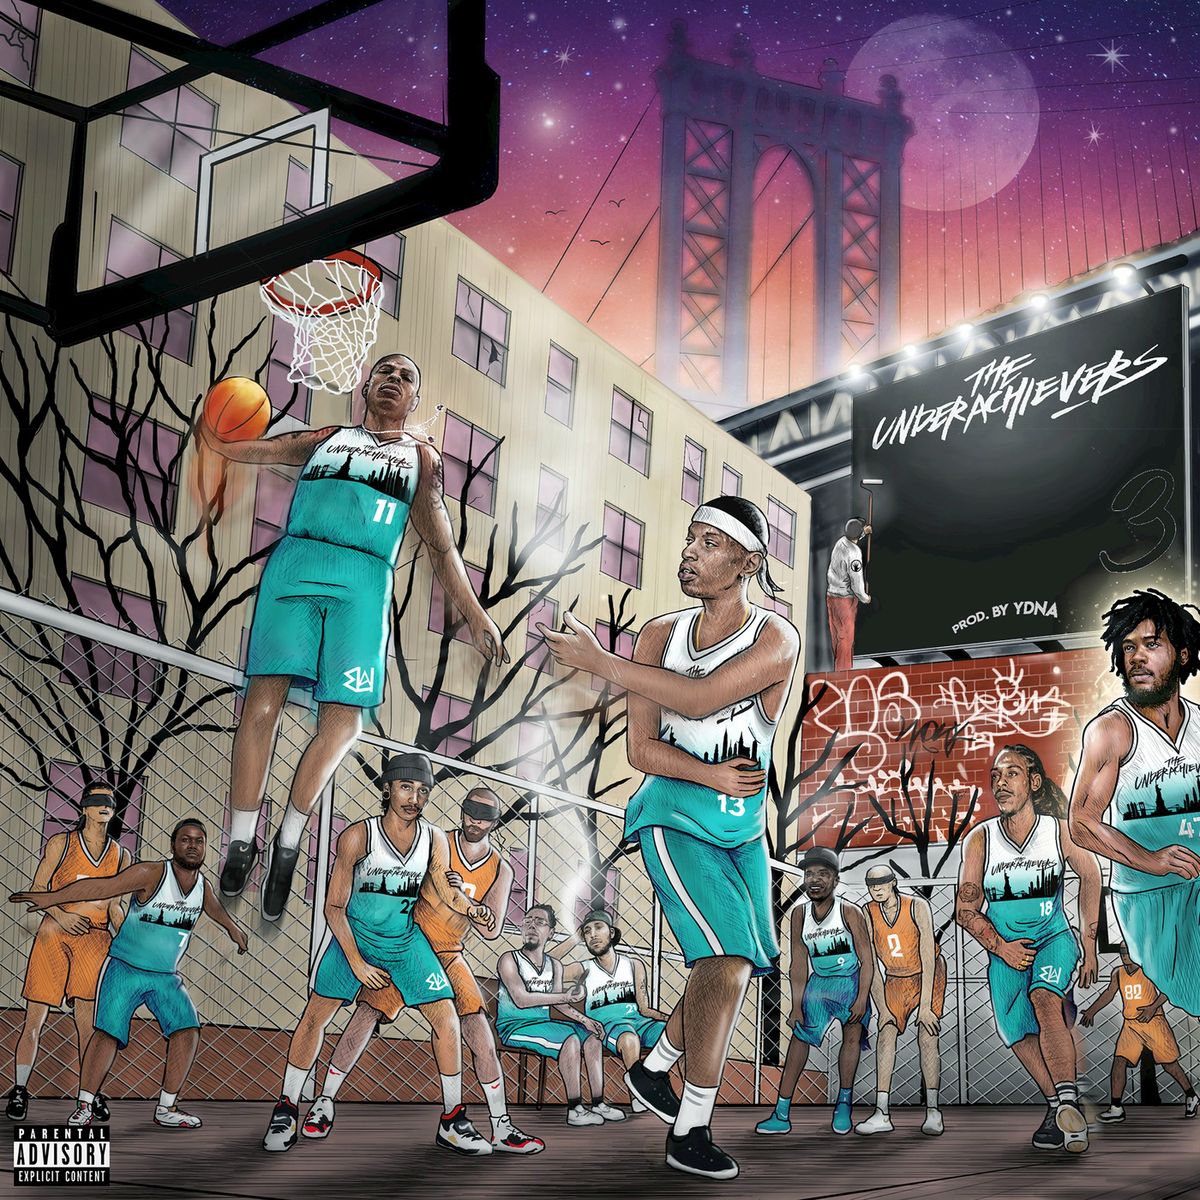 The Underachievers Are “Stone Cold” On New Single